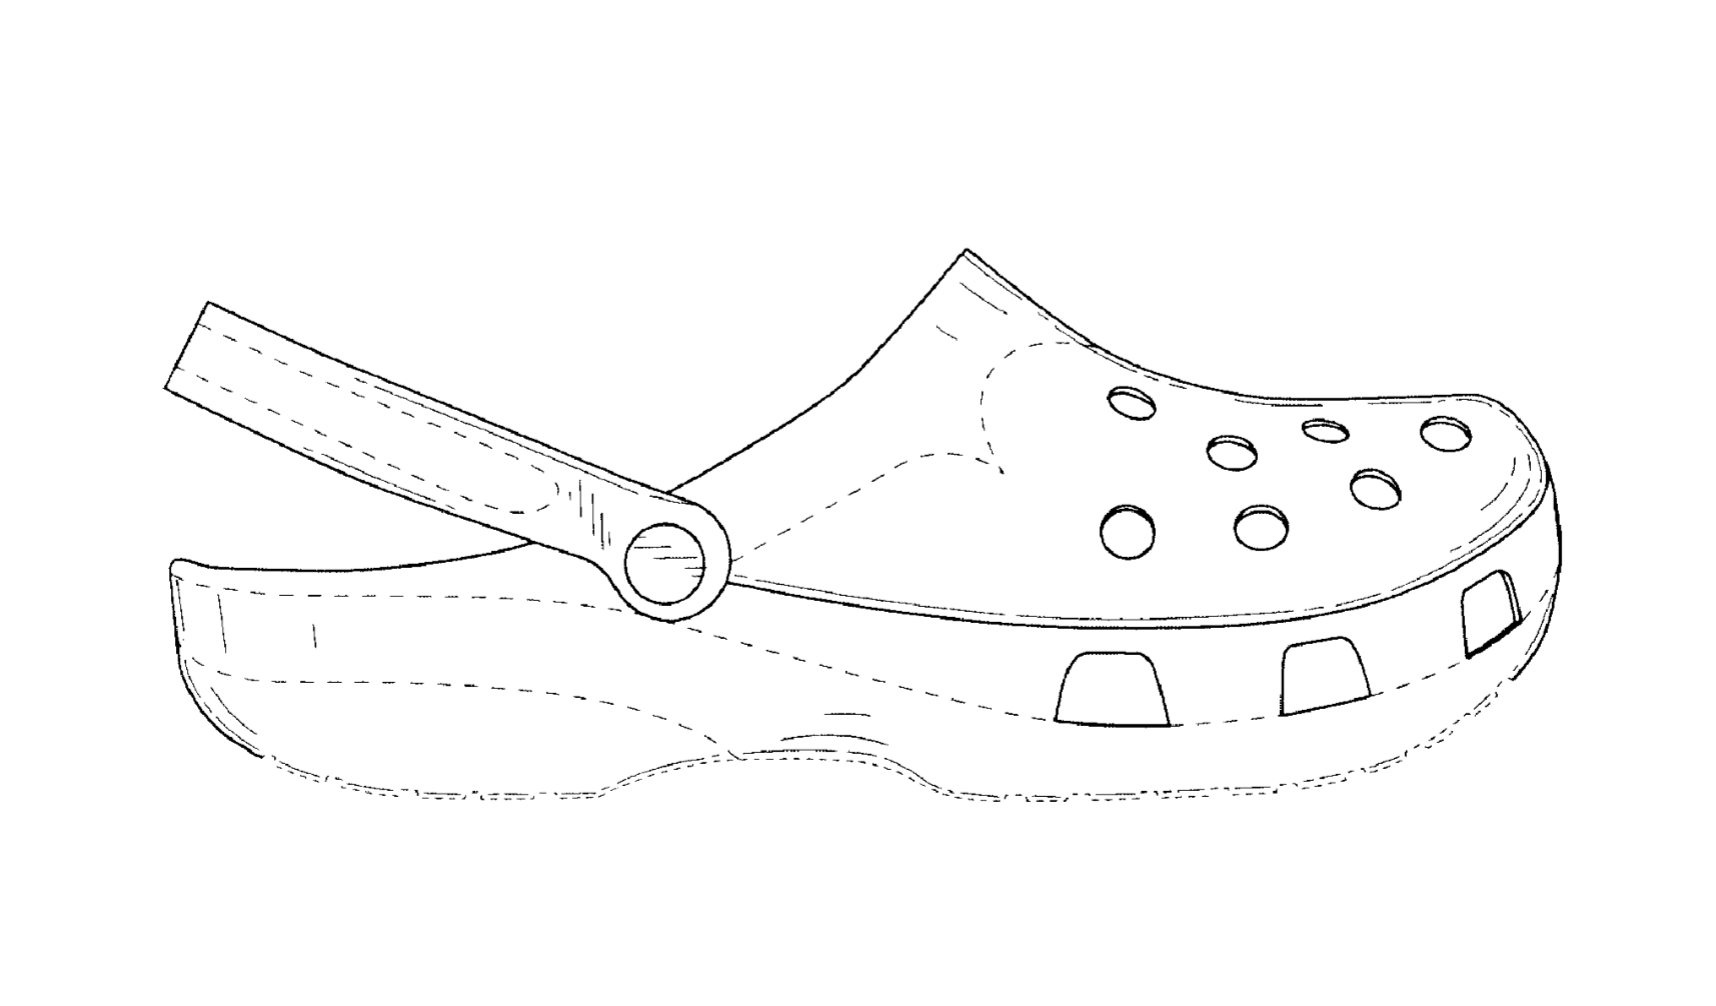  a drawing from Crocs' D517789 patent 